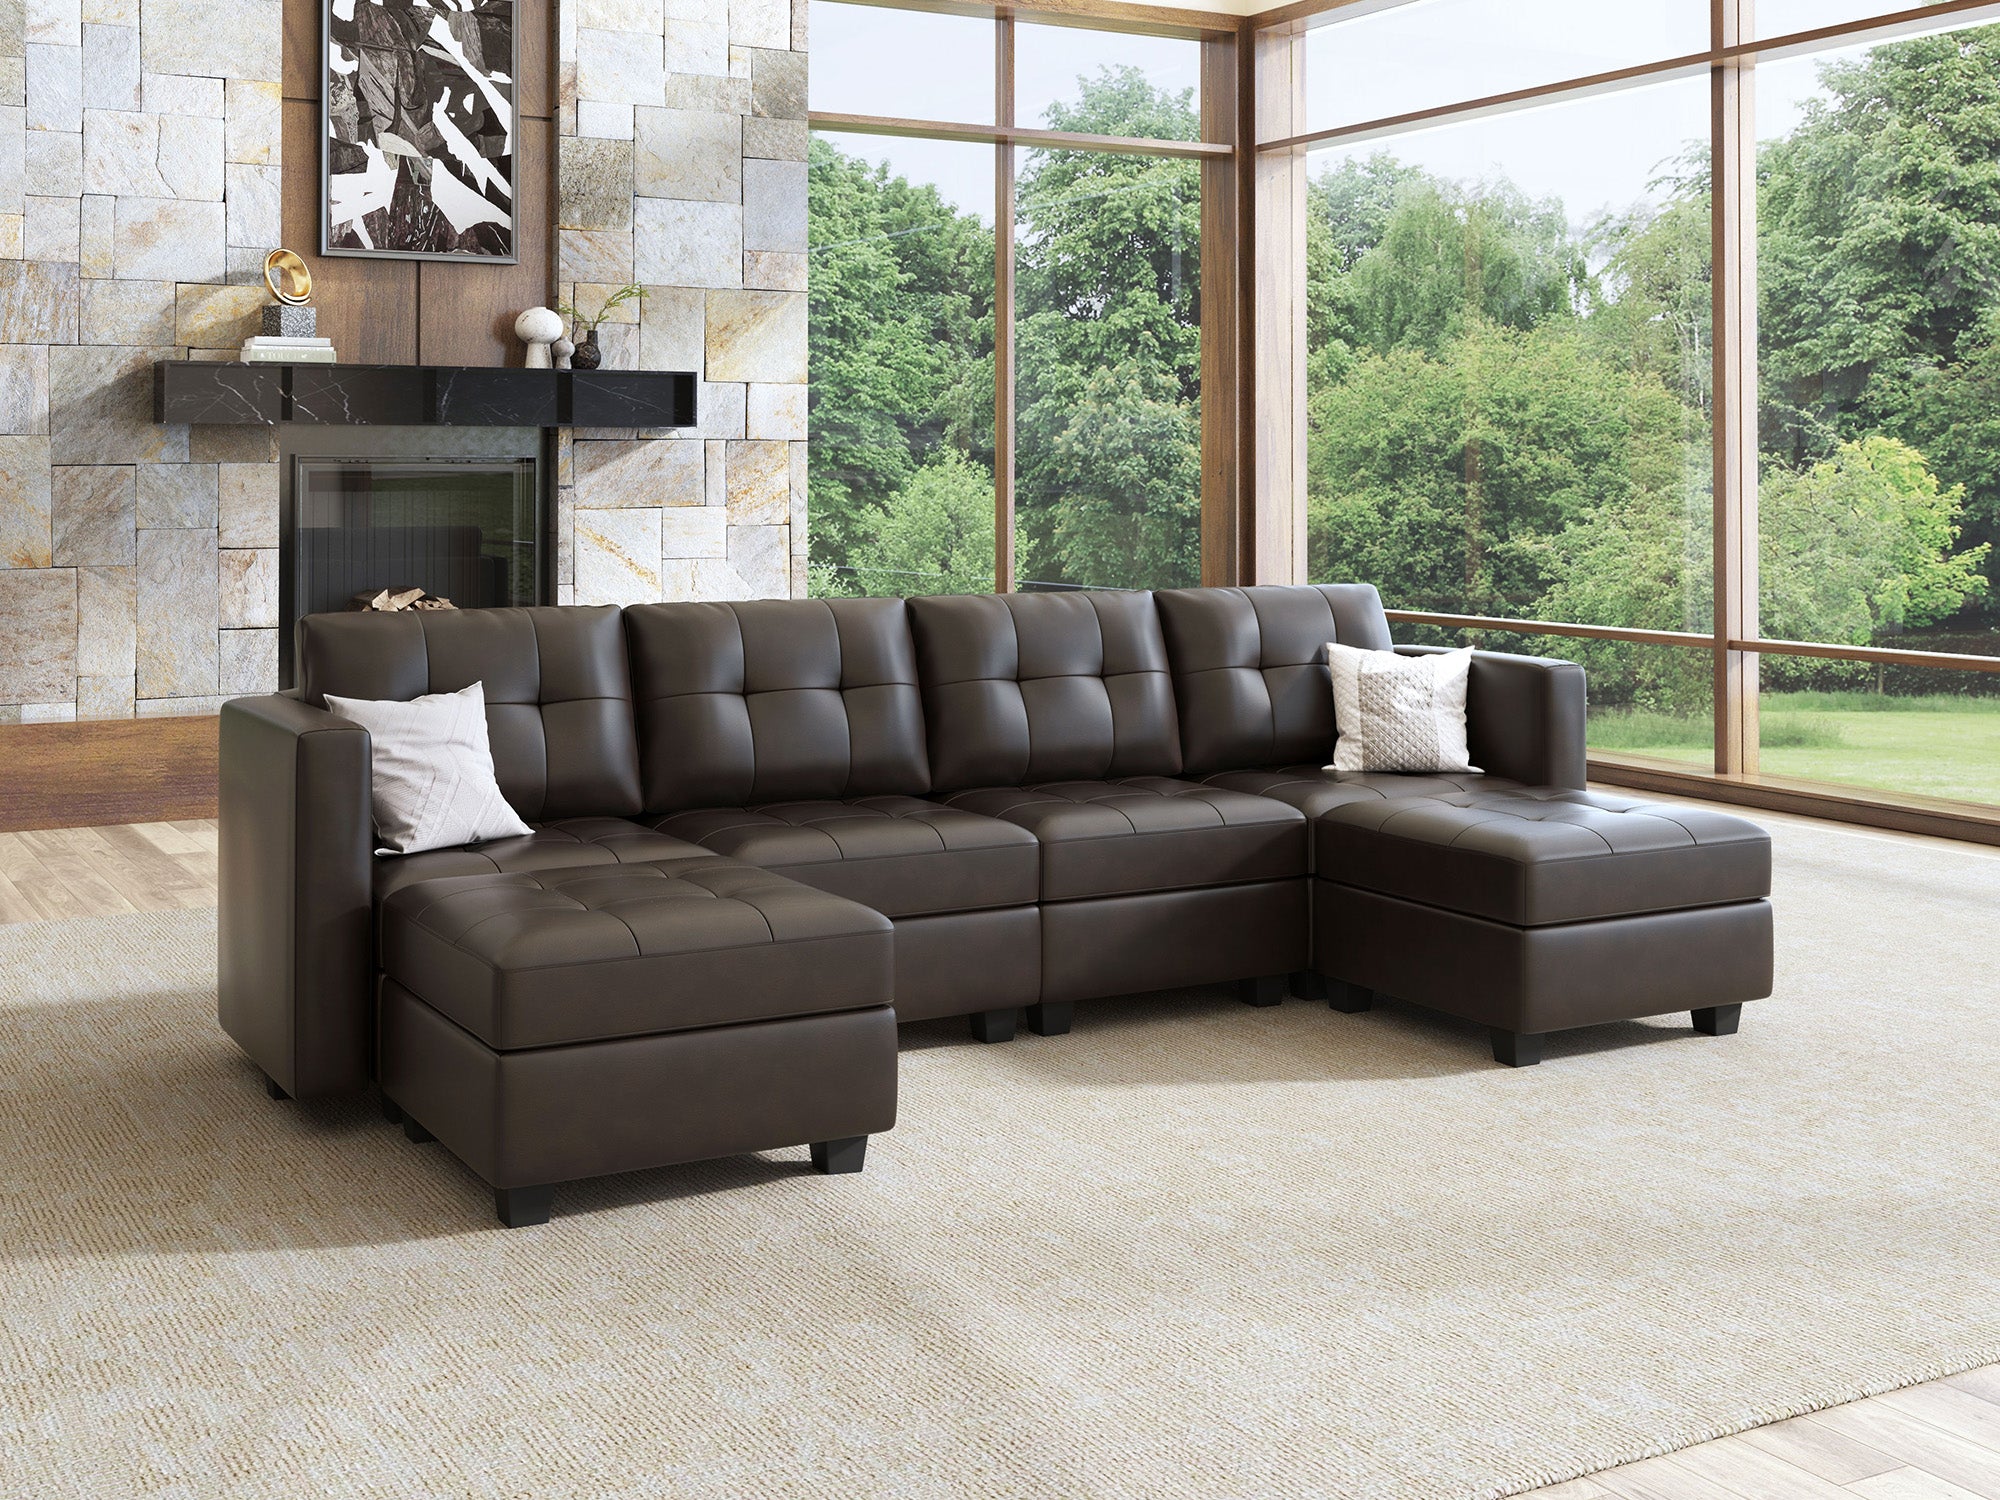 HONBAY 6-Piece Faux Leather Modular Sectional With Storage Seat